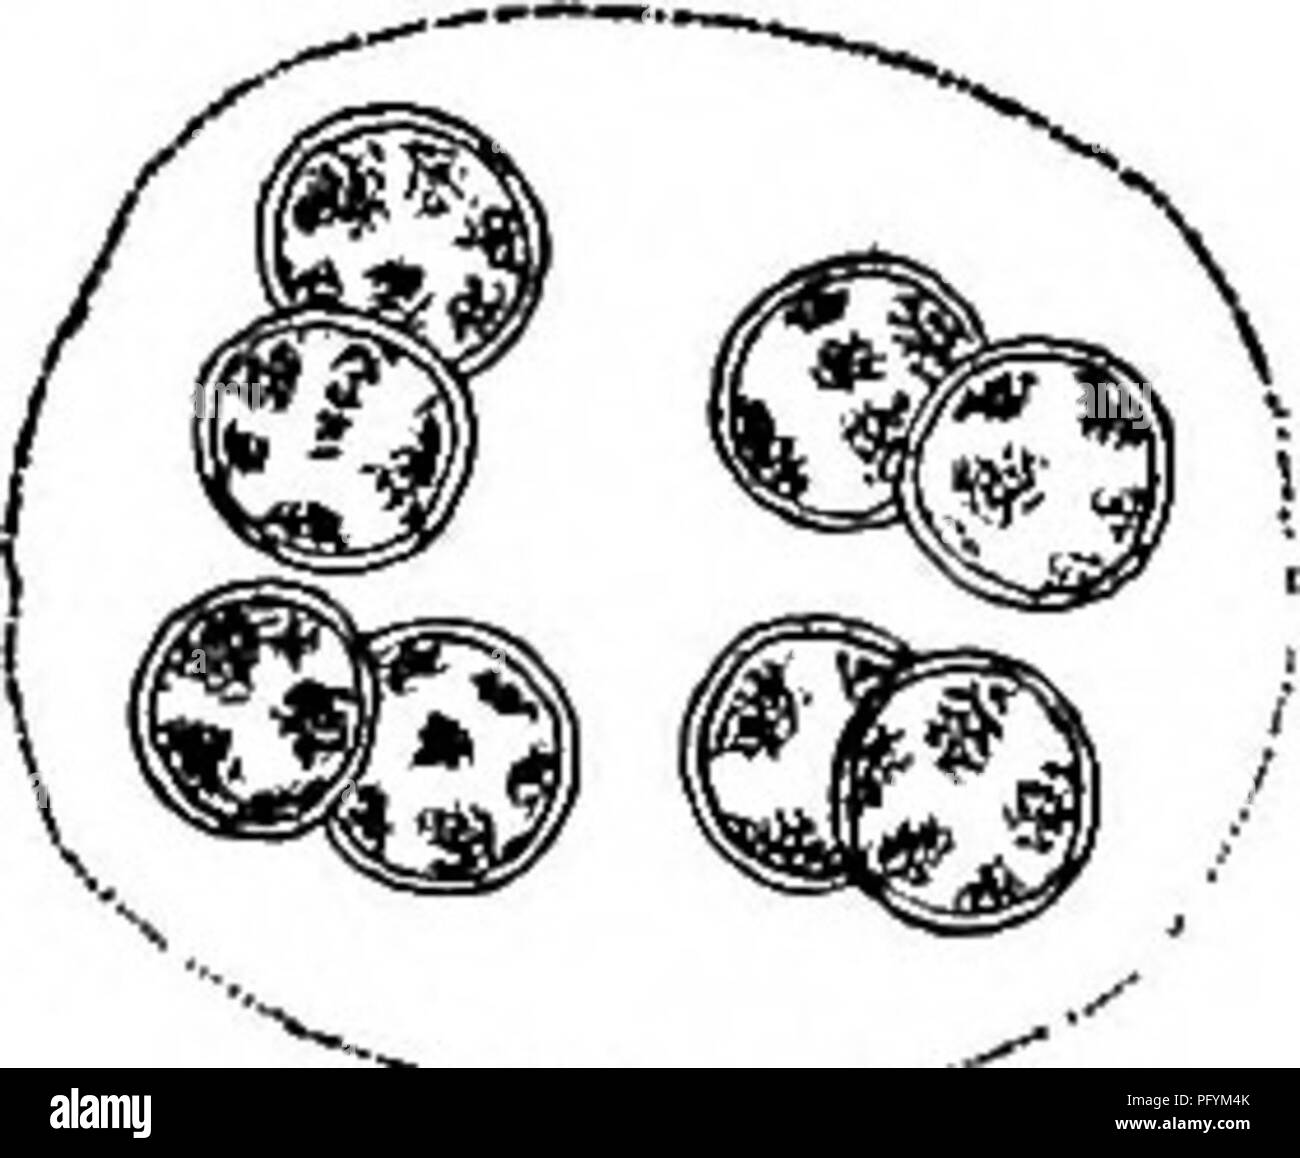 . Fresh-water biology. Freshwater biology. 123 (122) Chromatophores many, parietal Chlorobotrys Bohlin. Cells spherical, in a gelatinous matrix, as in SphaerocysHs, but the chlorophyll in many parietal discs. Fig. 168. Chlorobotrys regularis Bohlin. X 300. (After West.) 124 (121) Cells not spherical 125 125 (126) Cells crescent-shaped Kirchneriella Schmidle. Cells in' clusters, as in SphaerocysHs, but strongly crescent-shaped. In reproduction internal division takes place trans- versely and the four or eight daughter cells are set free by the breaking of the cell wall. Several species occur in Stock Photo